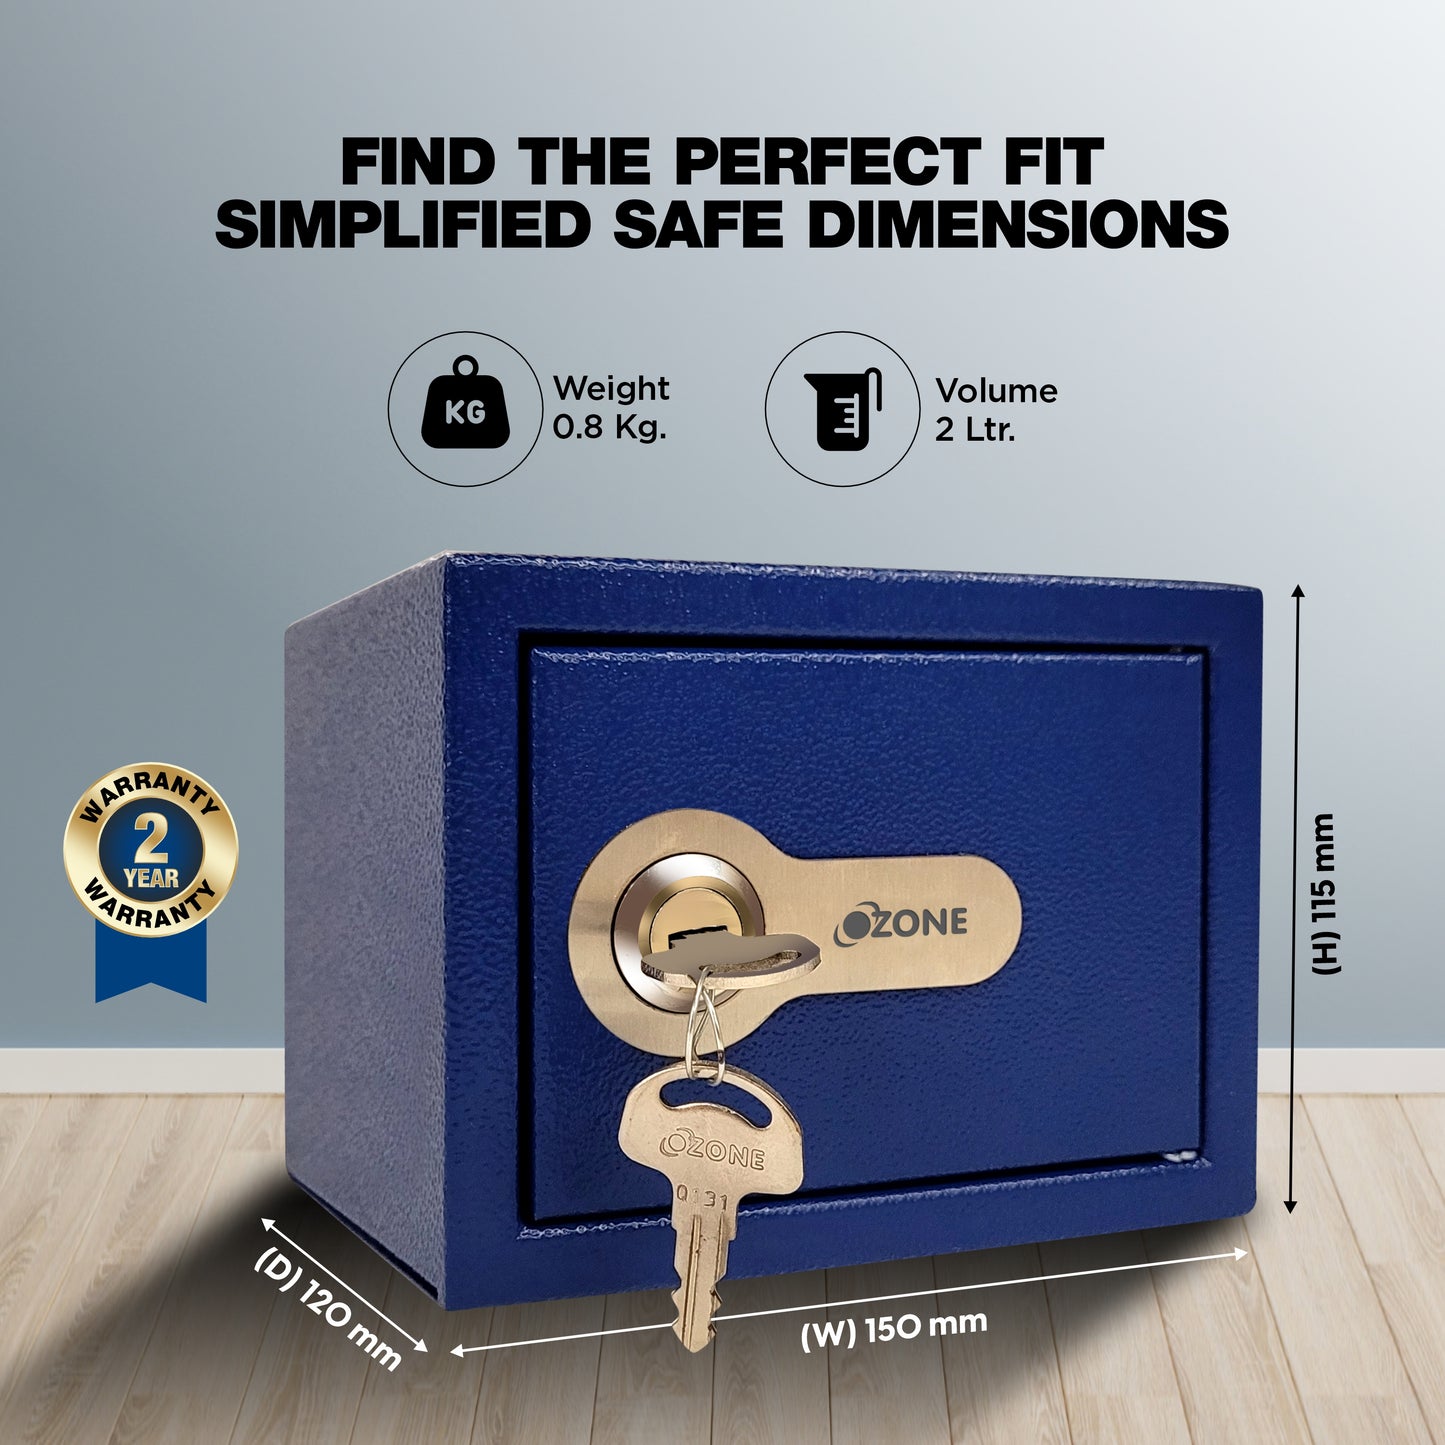 Ozone Compact Safe for Kids with Mechanical Key in Blue and White colours (2 Ltrs.)